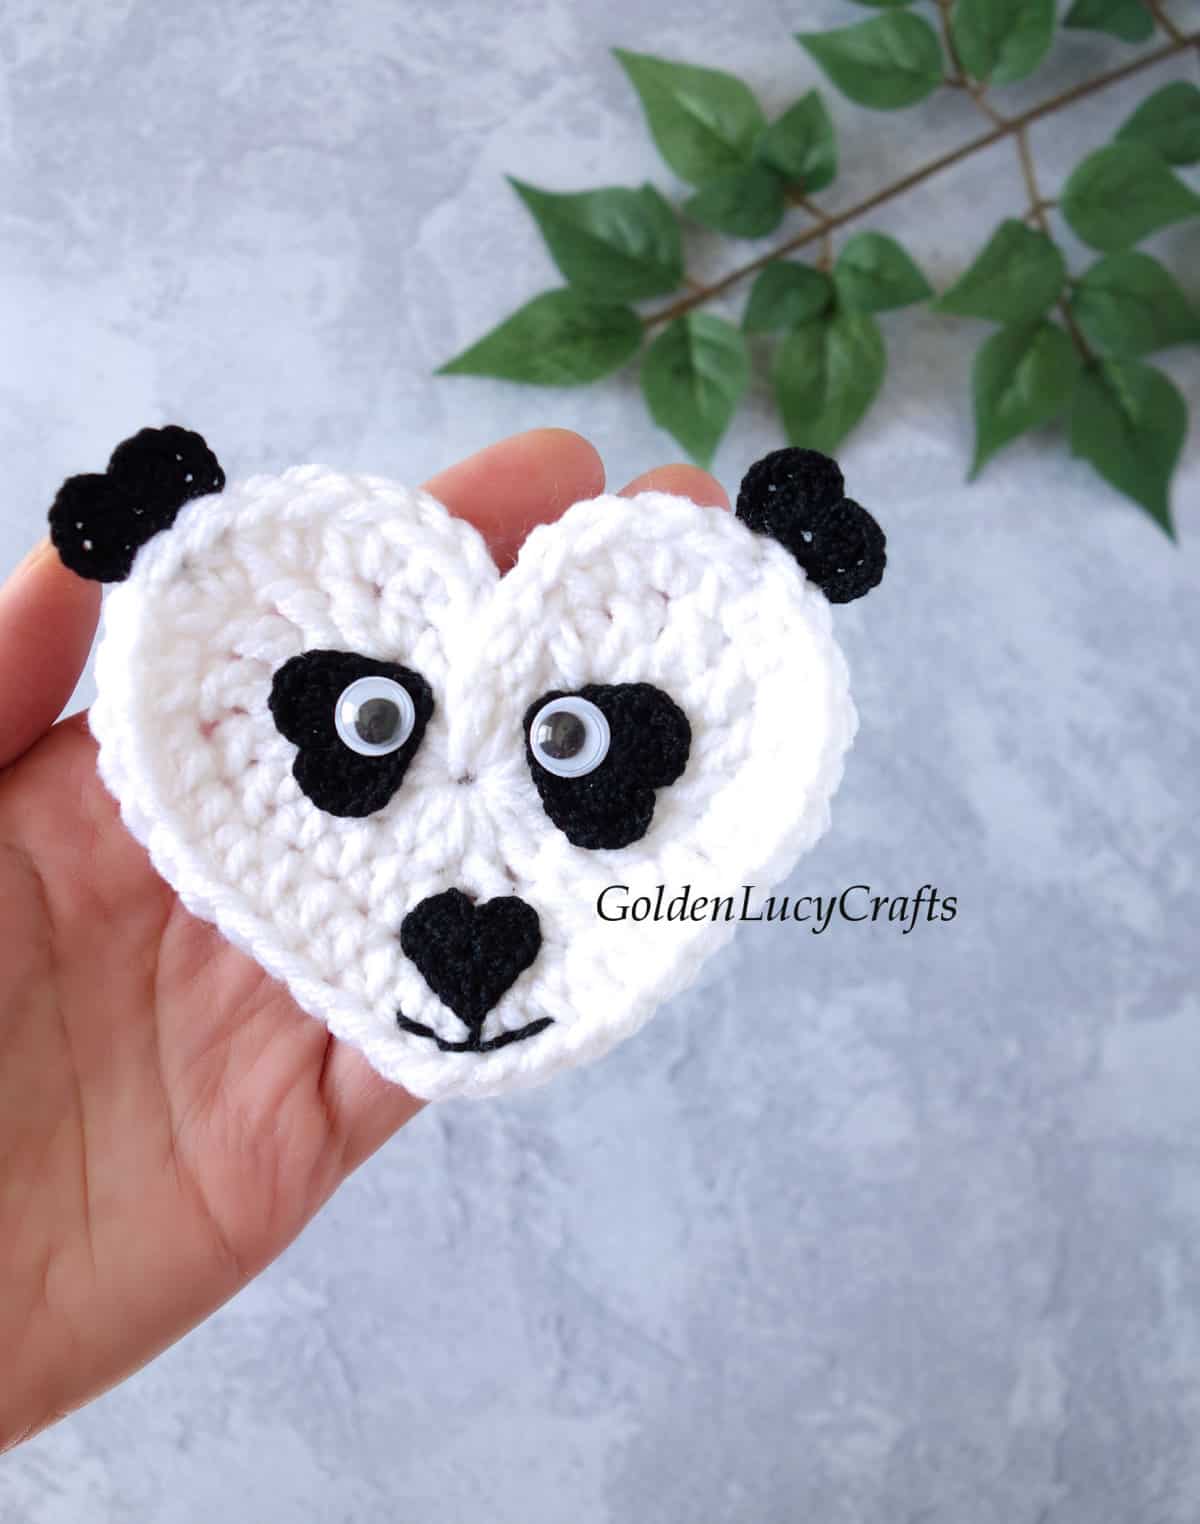 Crochet panda applique in the palm of a hand.